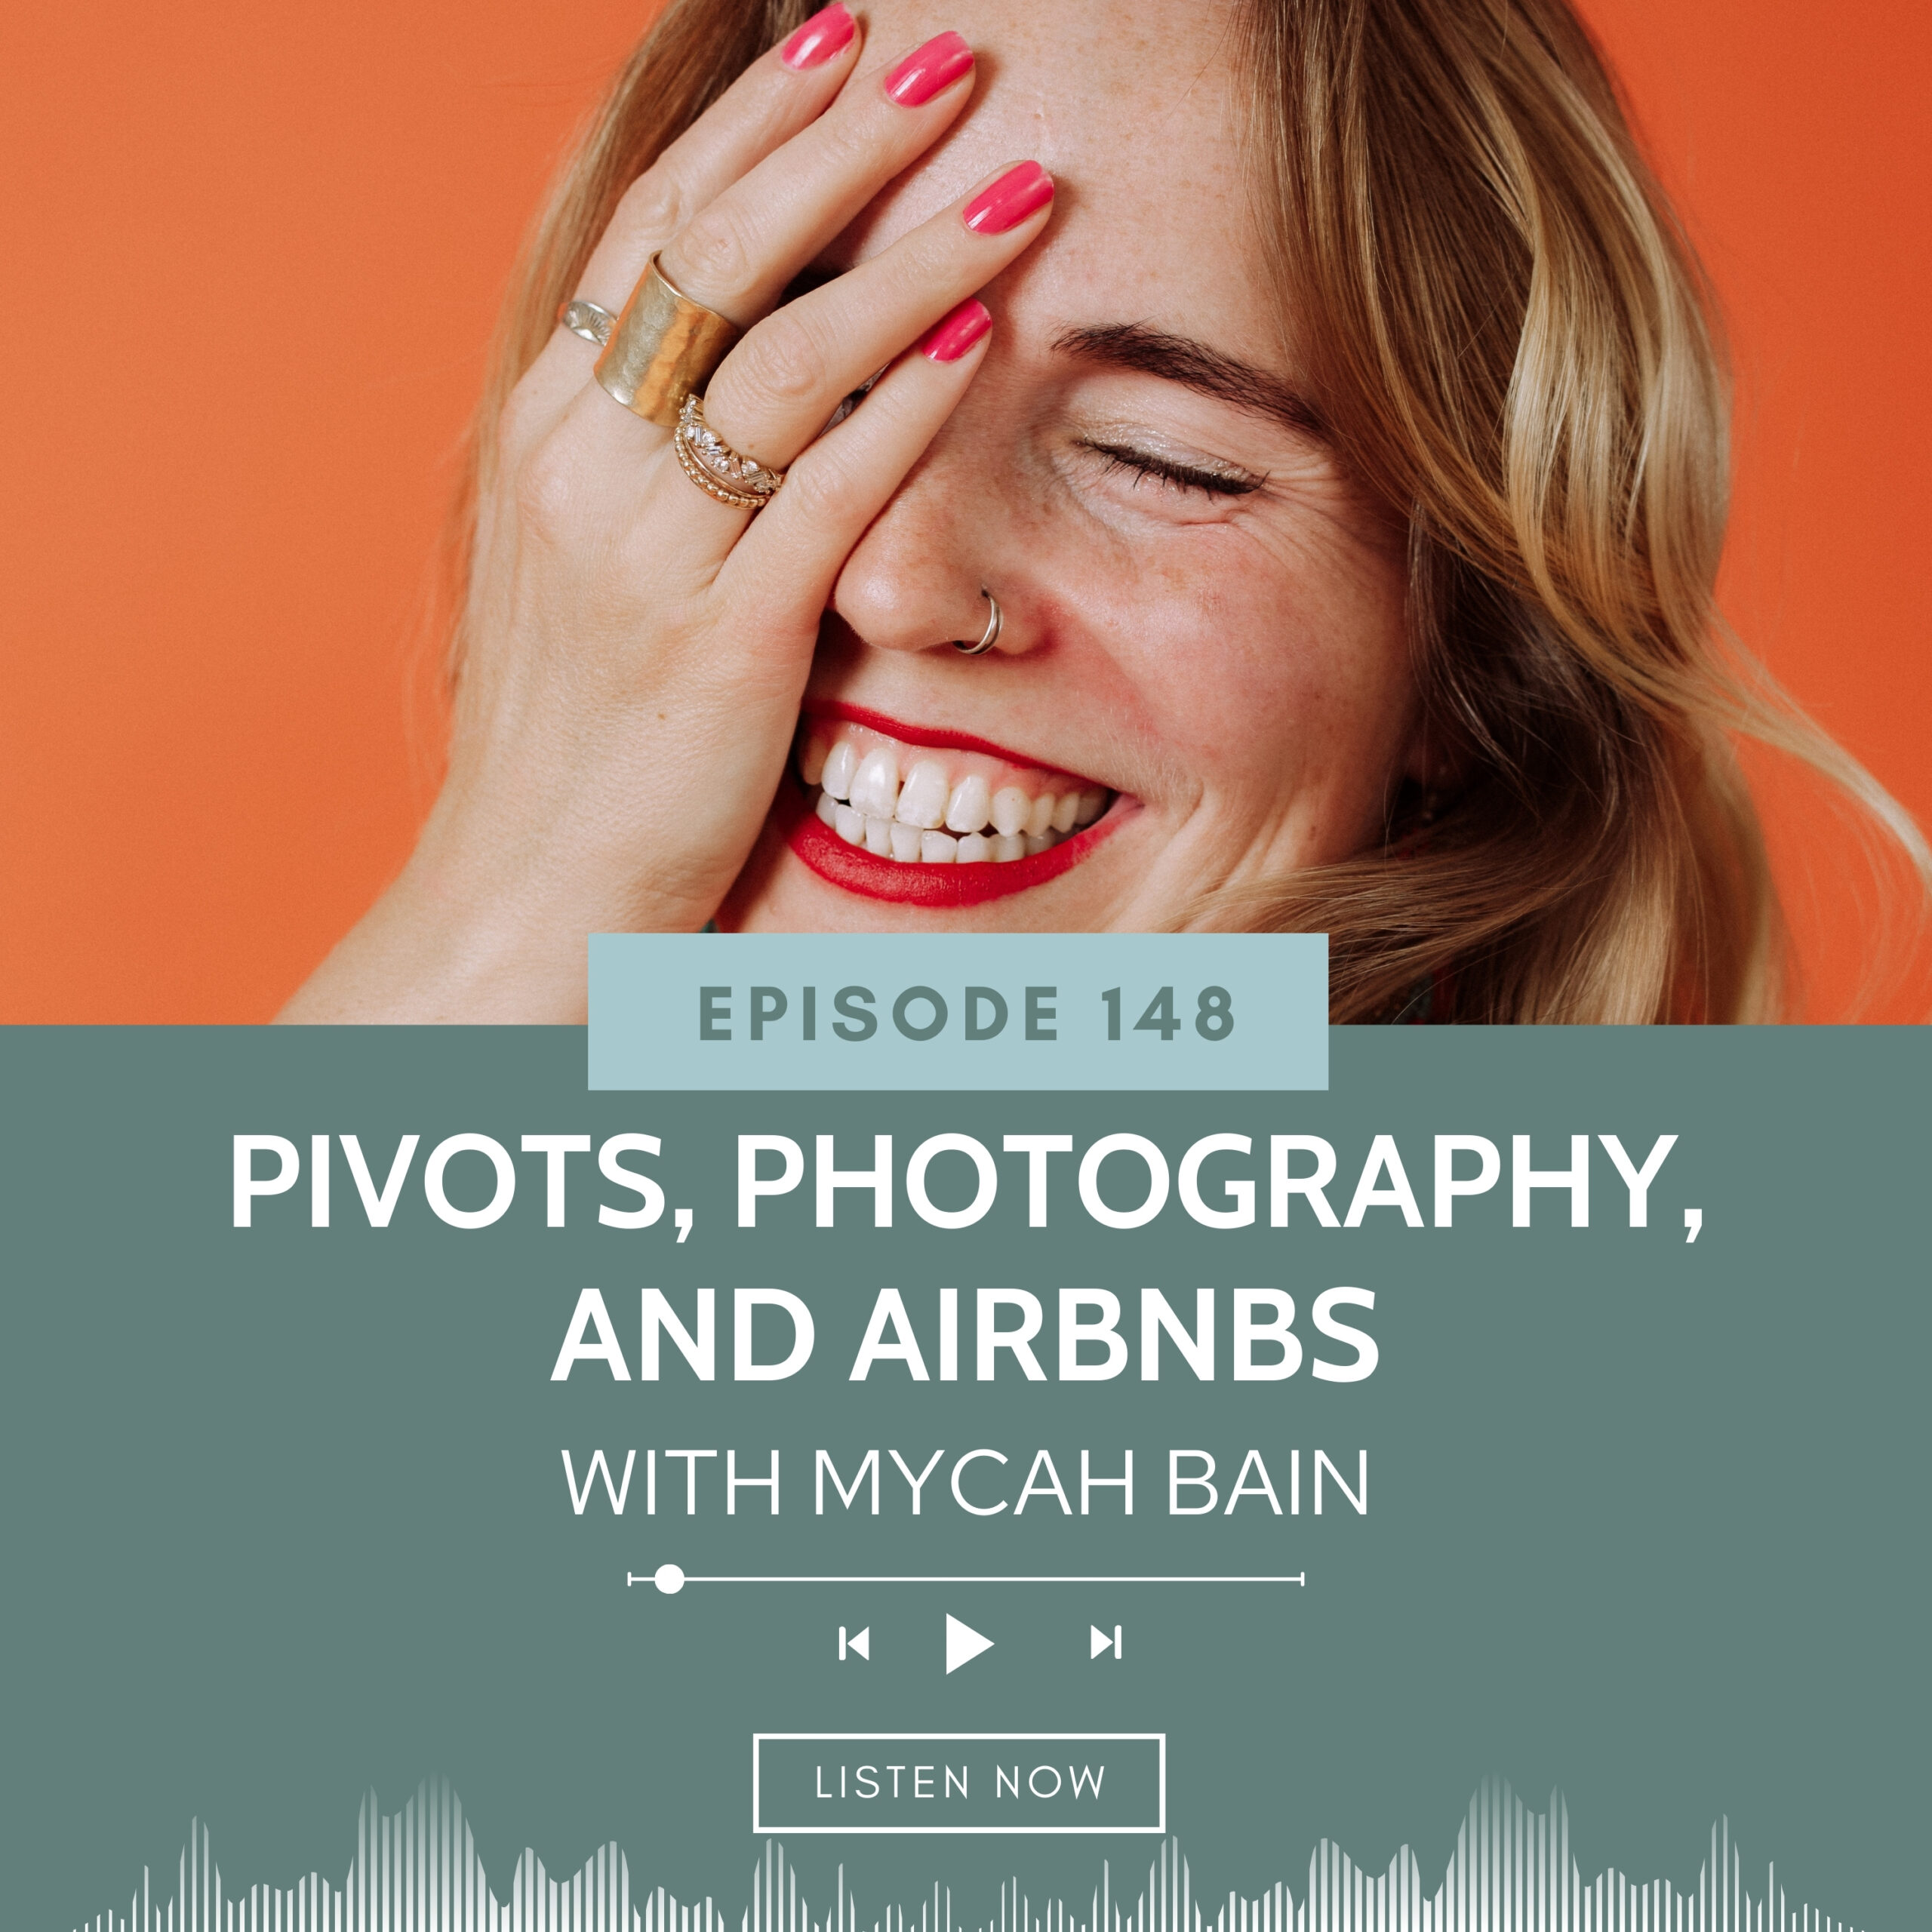 Photography Coach and Mentor Mycah Bain with Quianna Marie Weekly - Photography Podcast